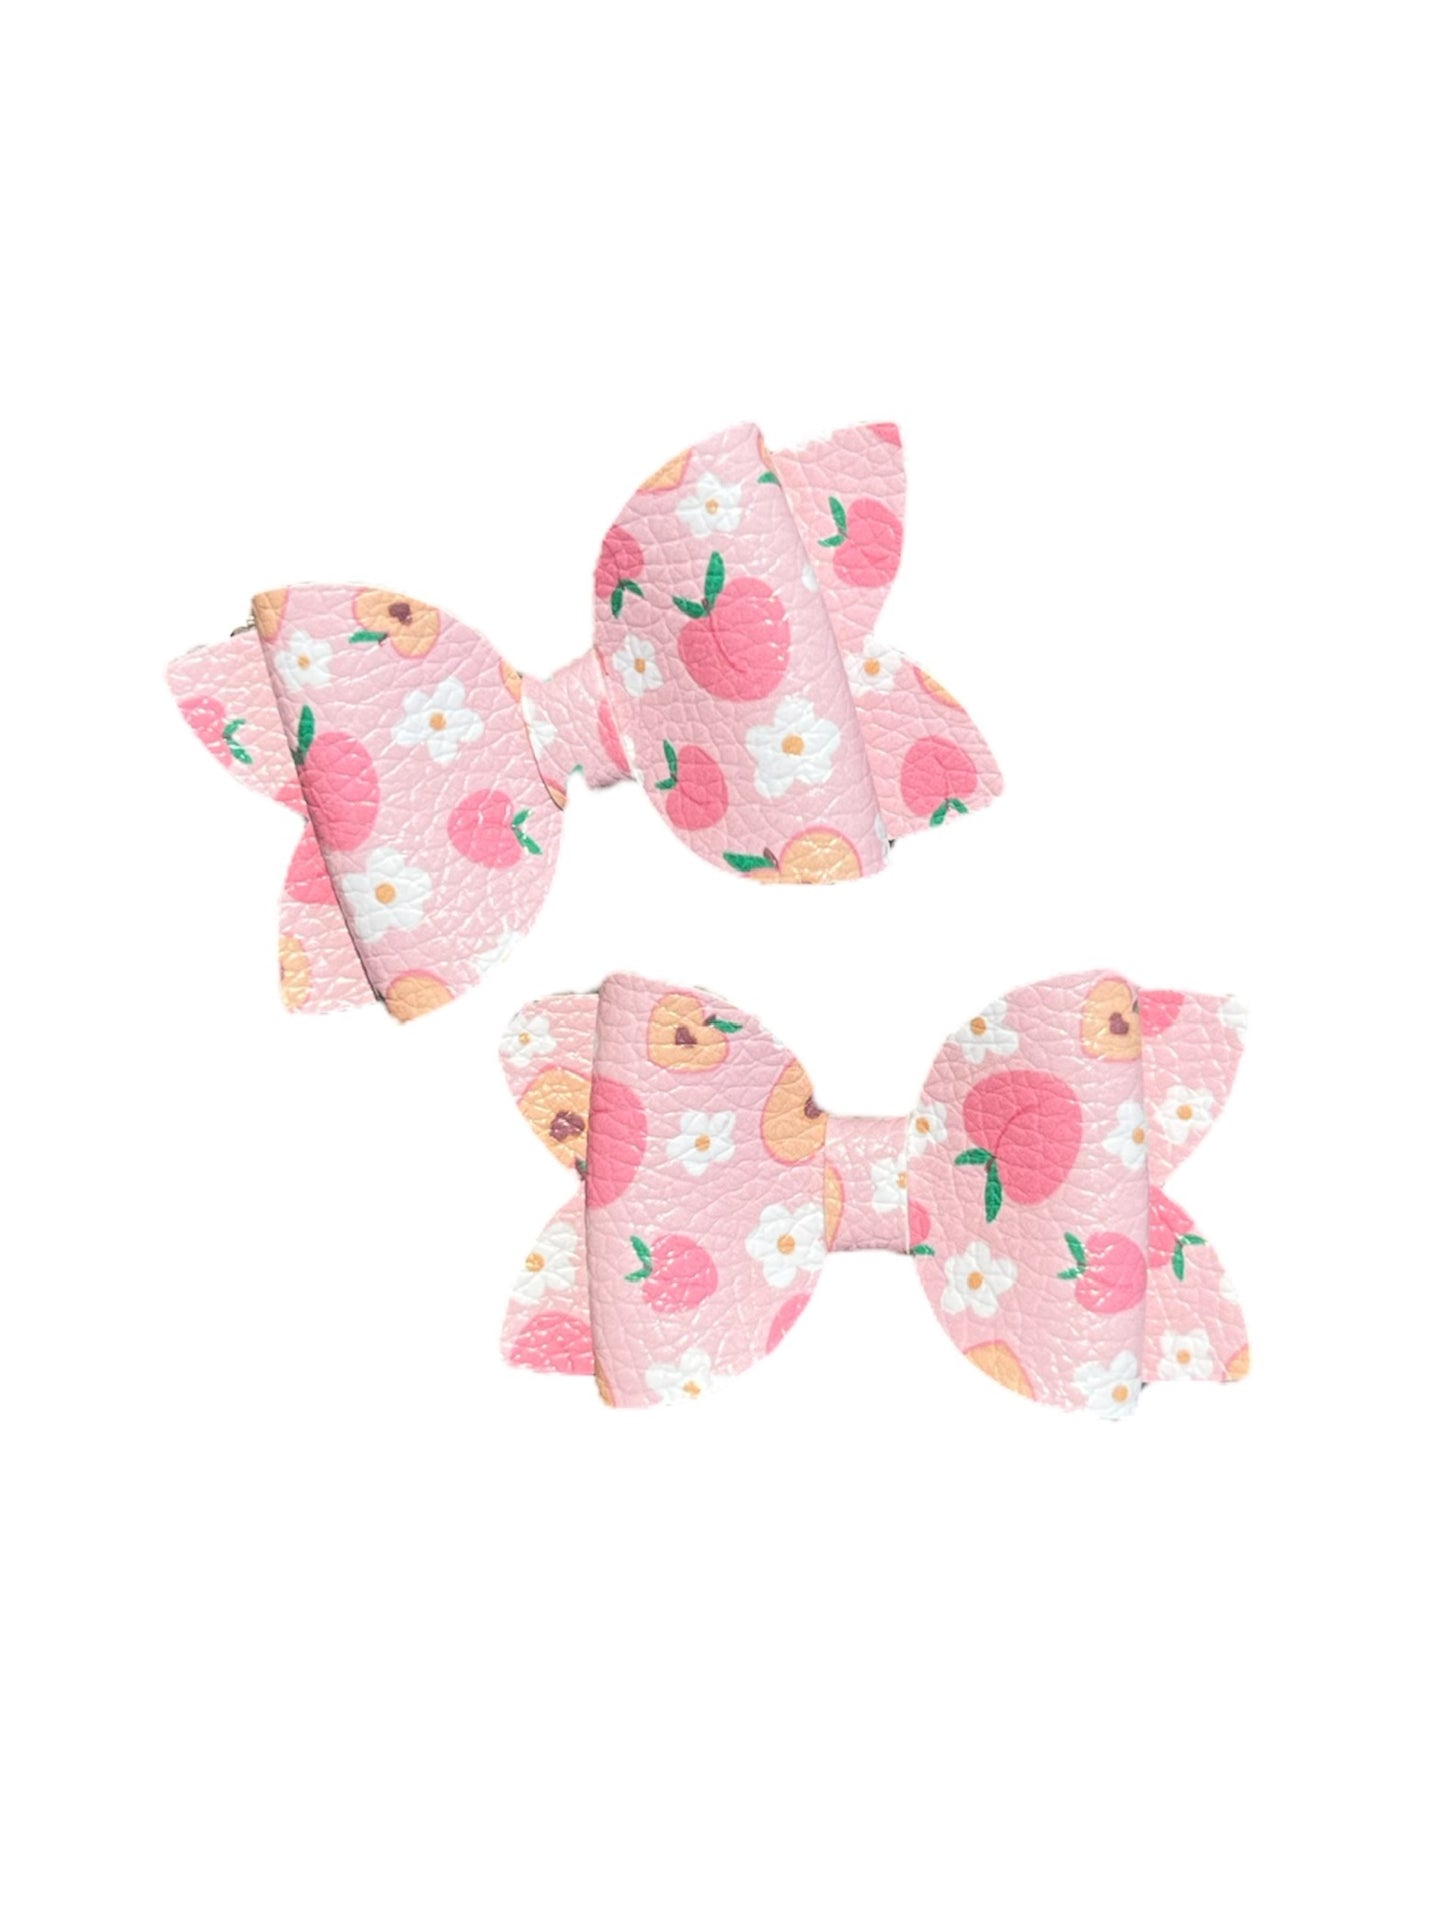 Peachy Pink Pigtail Bows!